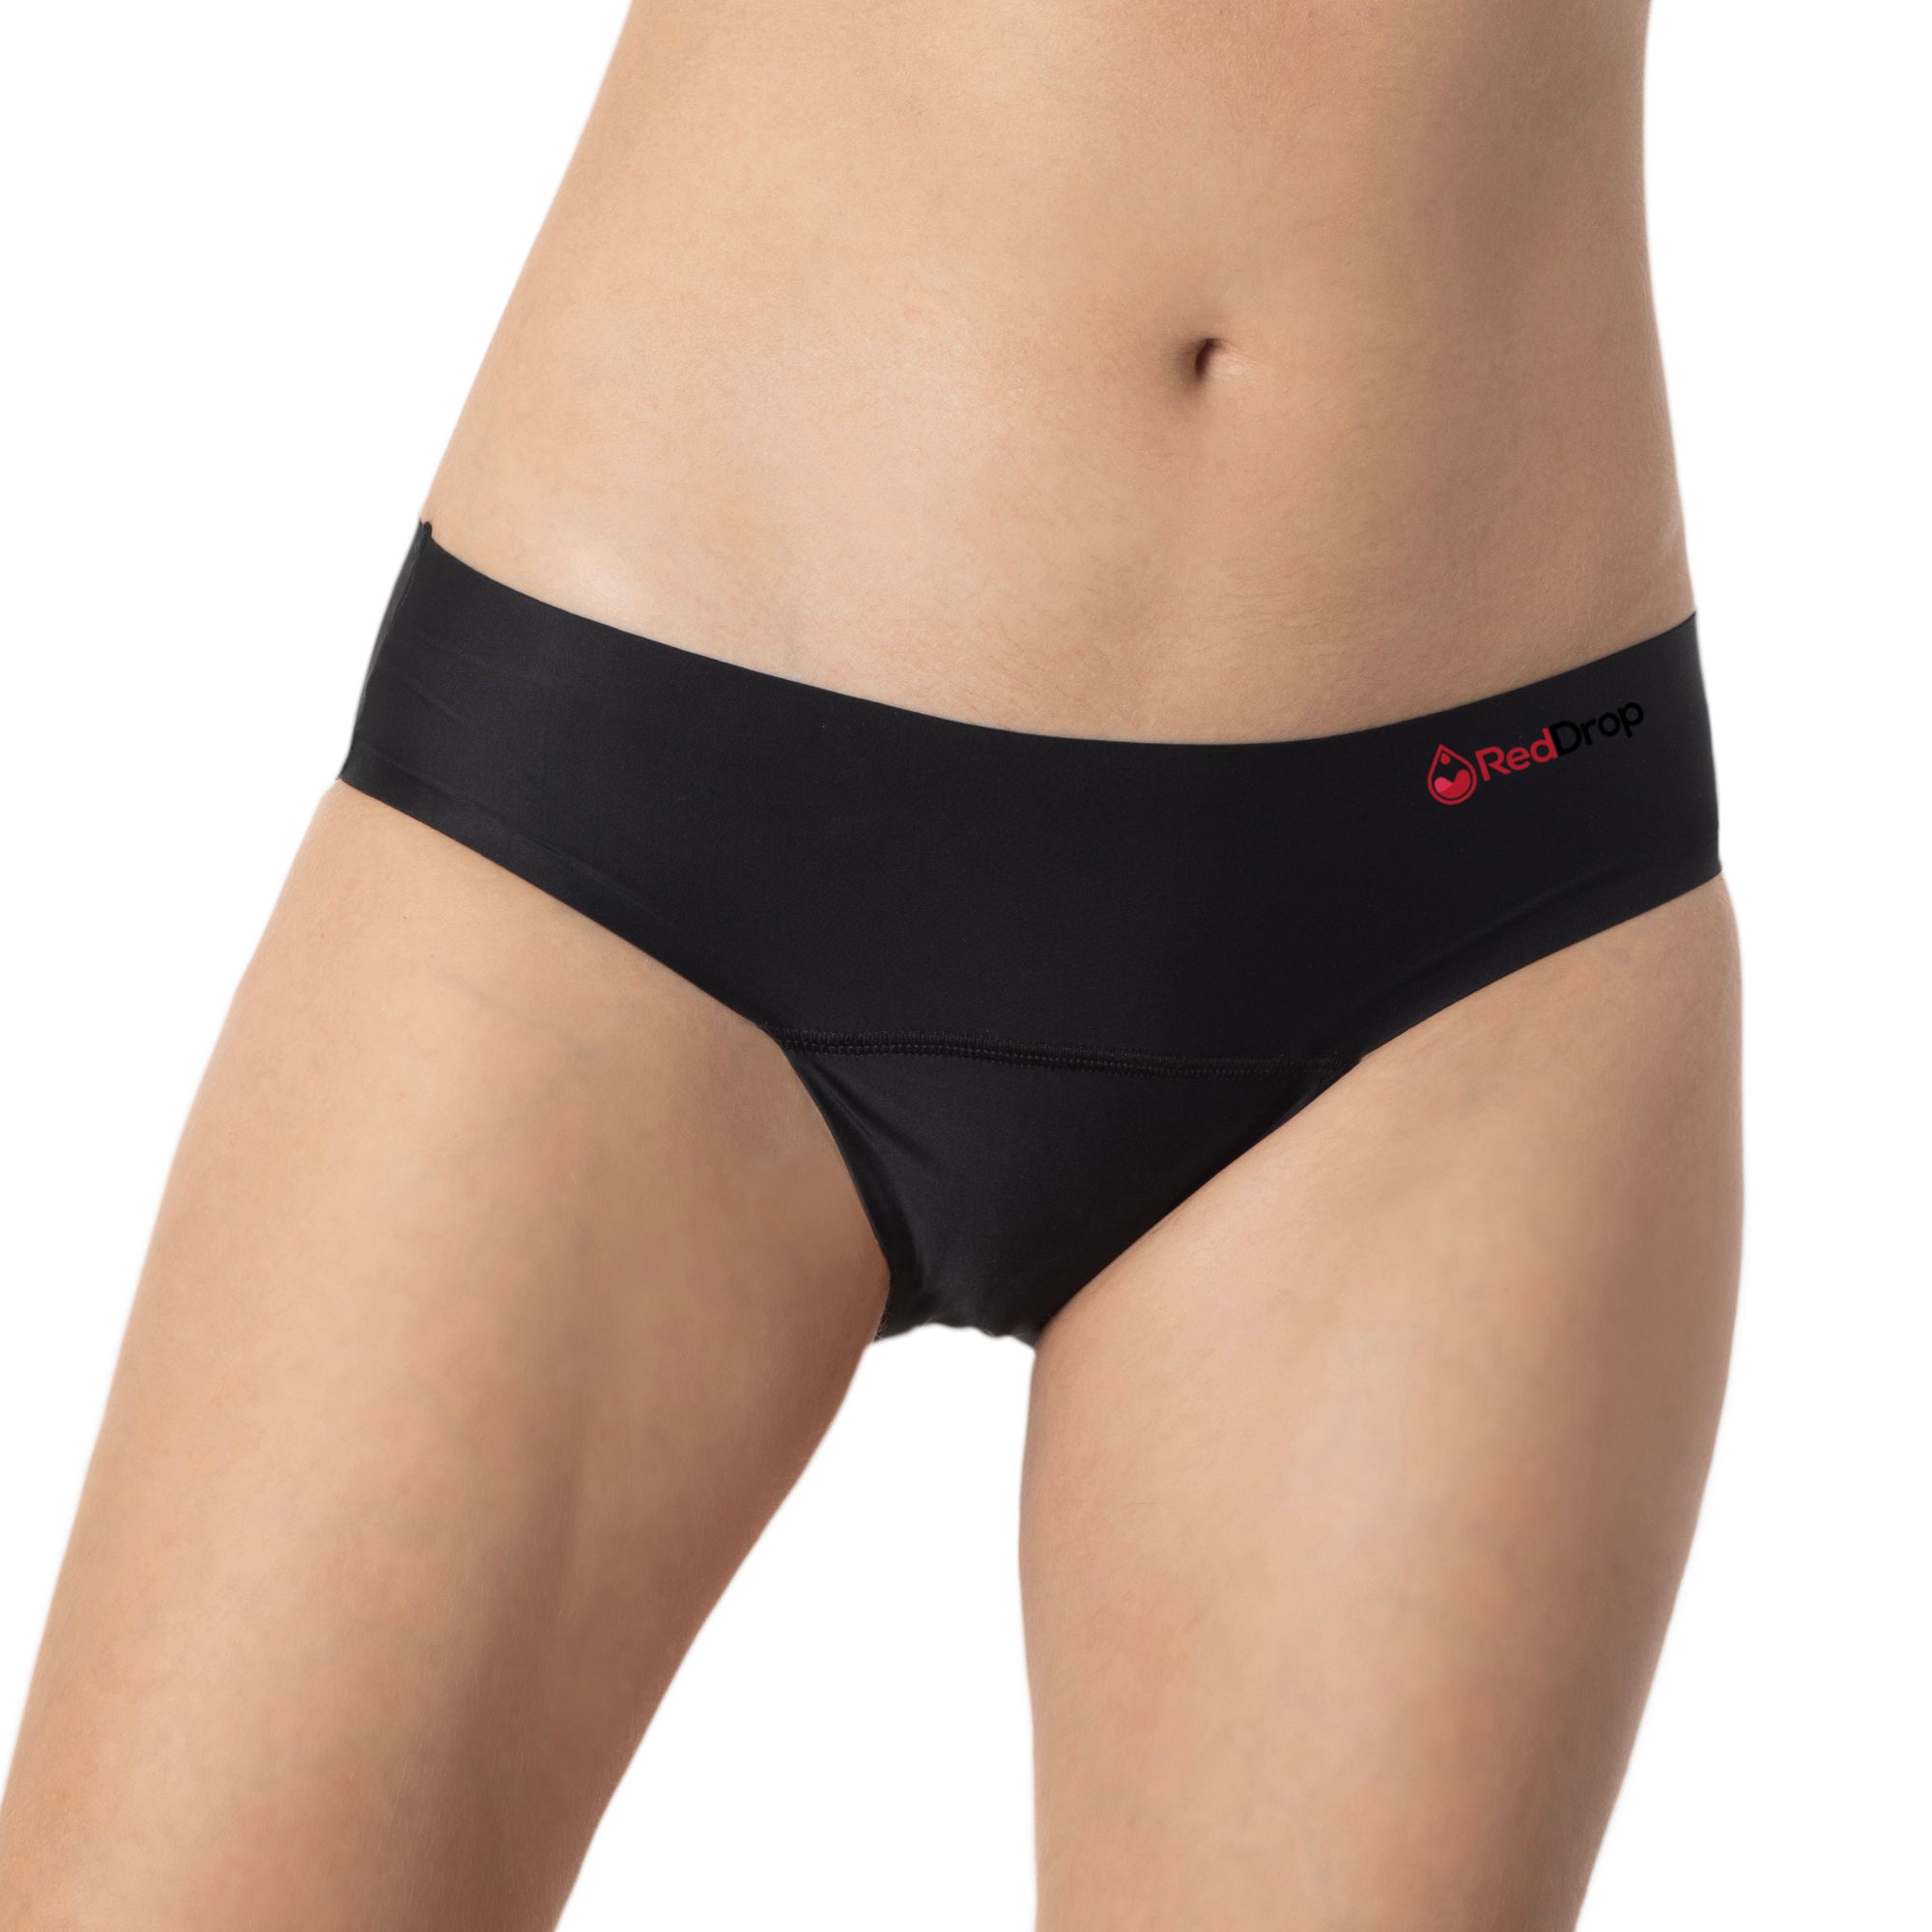 CODE RED Period Panties with Pocket- Red- L